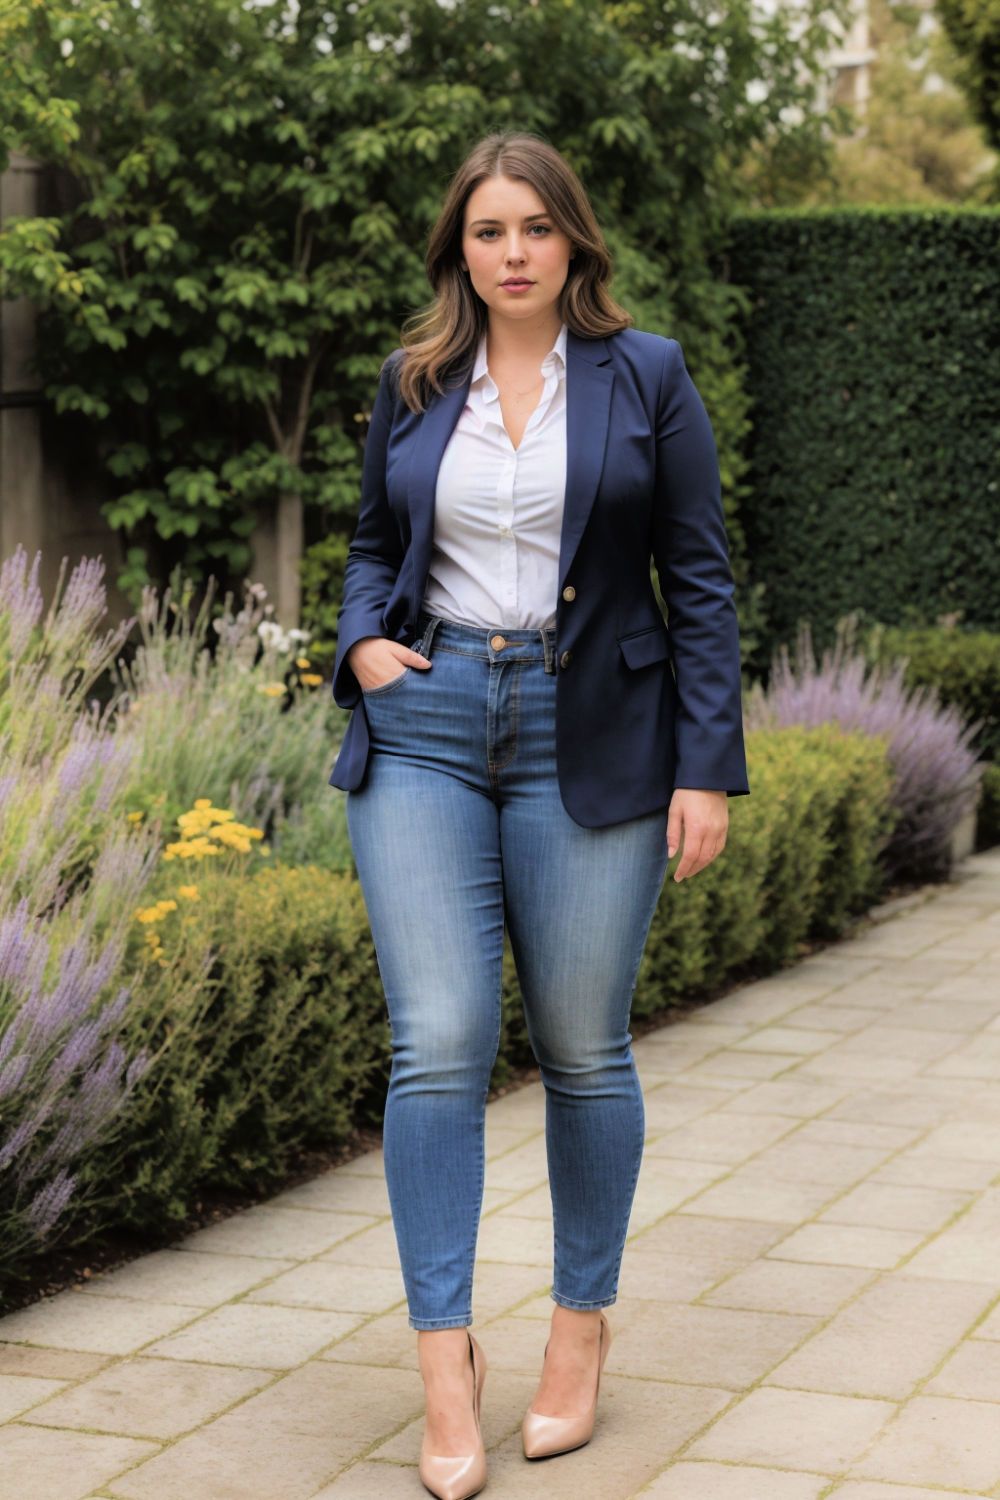 classic tailored blazer with jeans